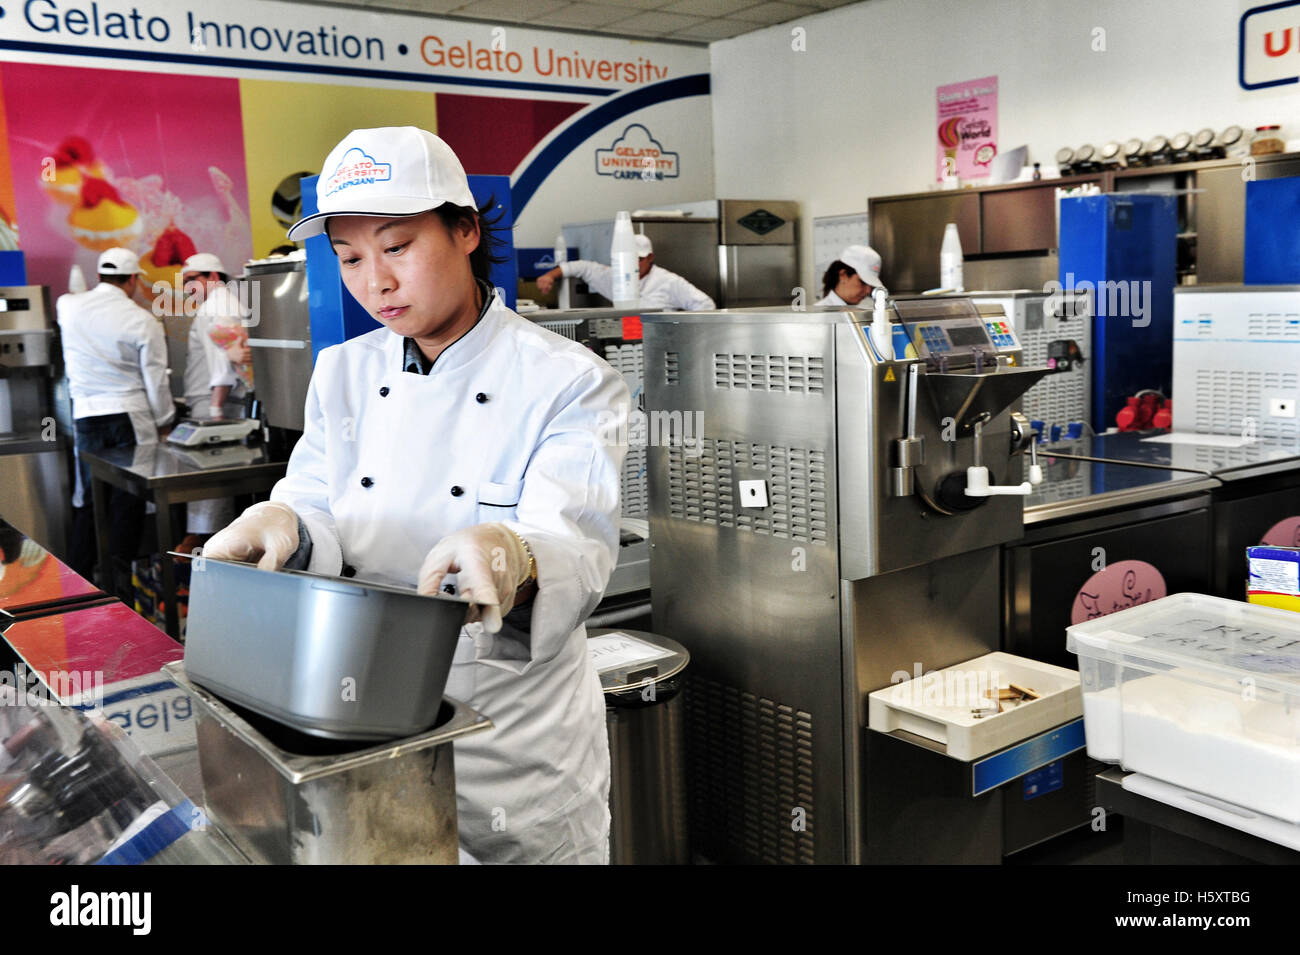 Students at work during a practical lesson at the Carpigiani gelato University in Anzola nell'Emilia, Italy Stock Photo